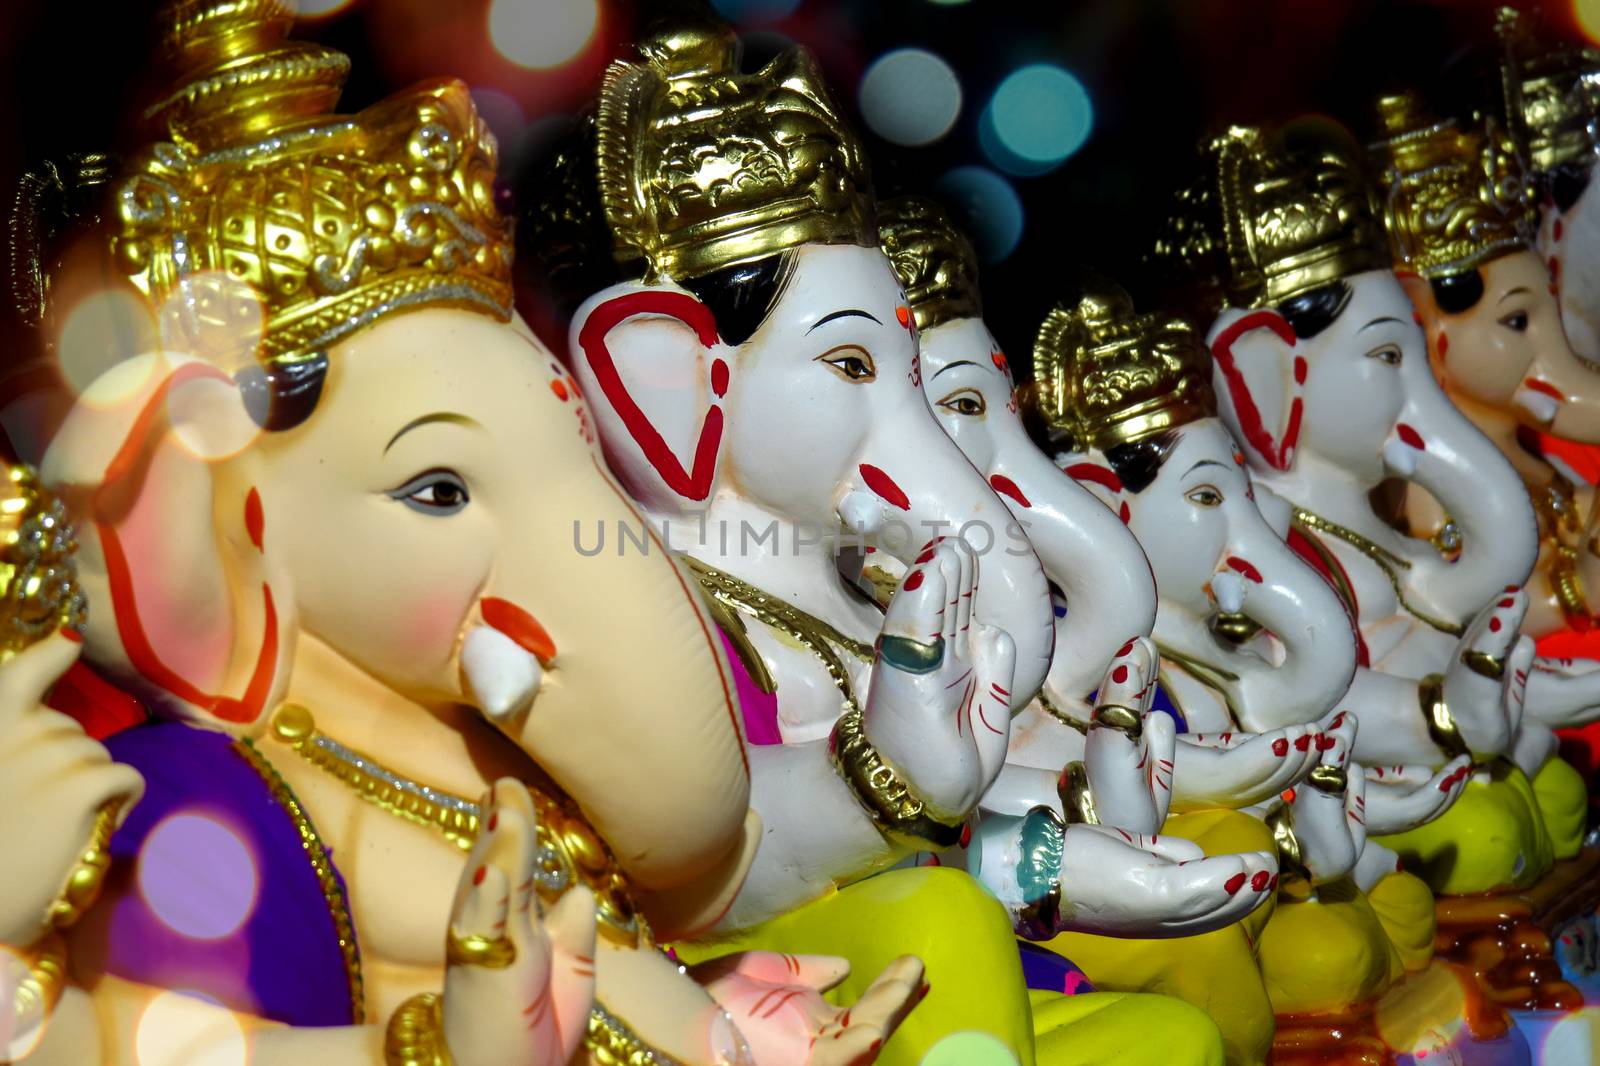 Ganesha Idols with different moods and poses for sale during Ganesha festival in India                               